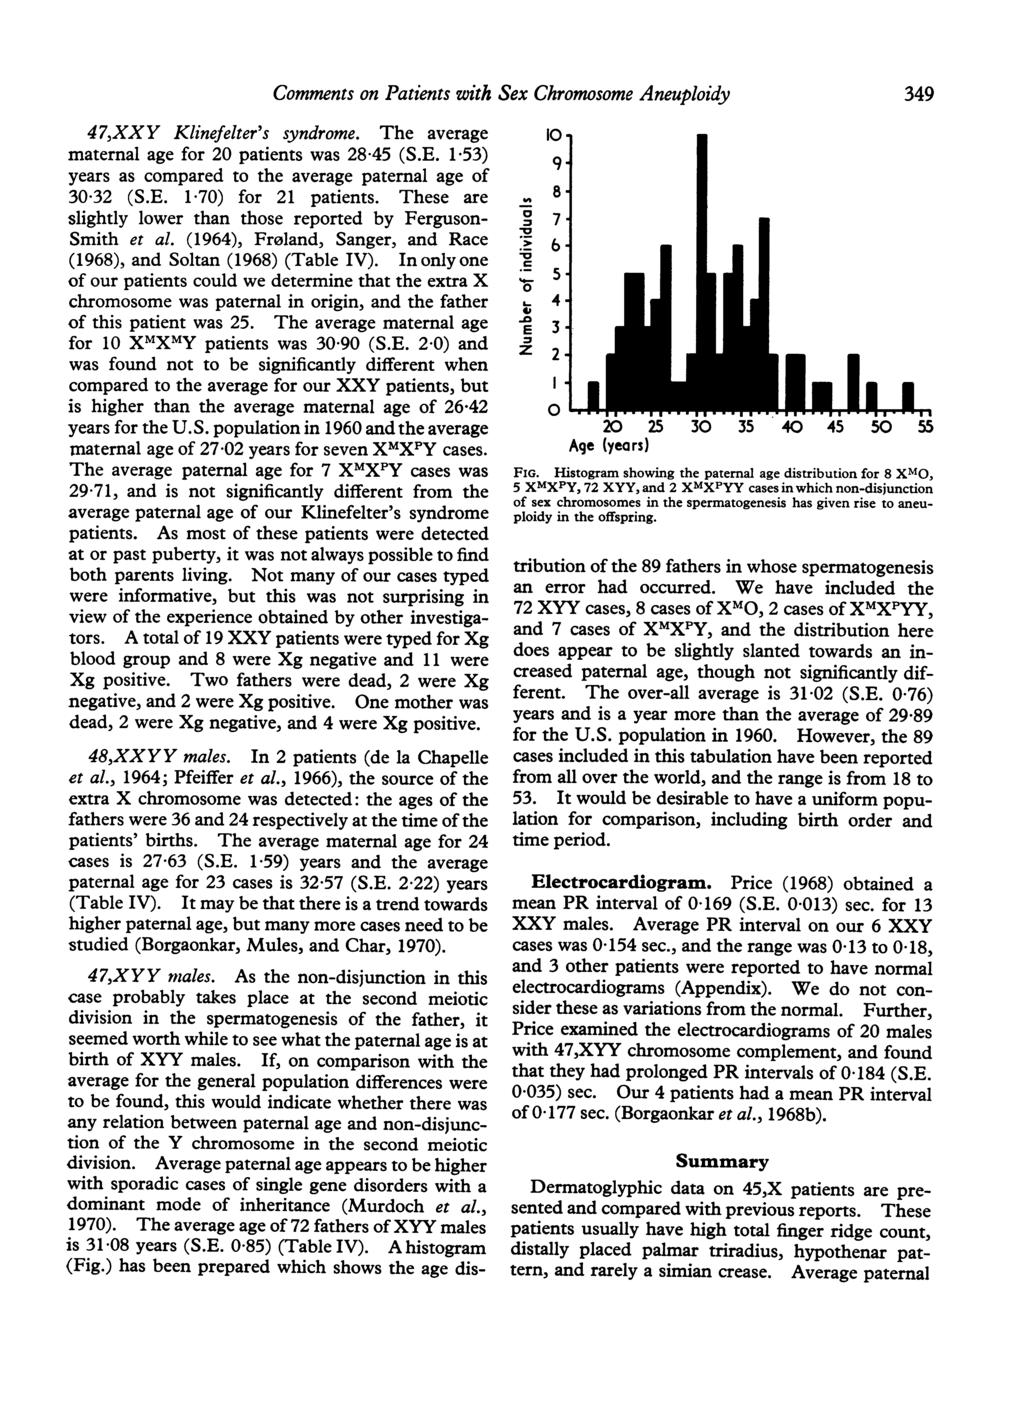 Comments on Patients with Sex Chromosome Aneuploidy 47,XXY Klinefelter's syndrome. The average maternal age for 20 patients was 28-45 (S.E.